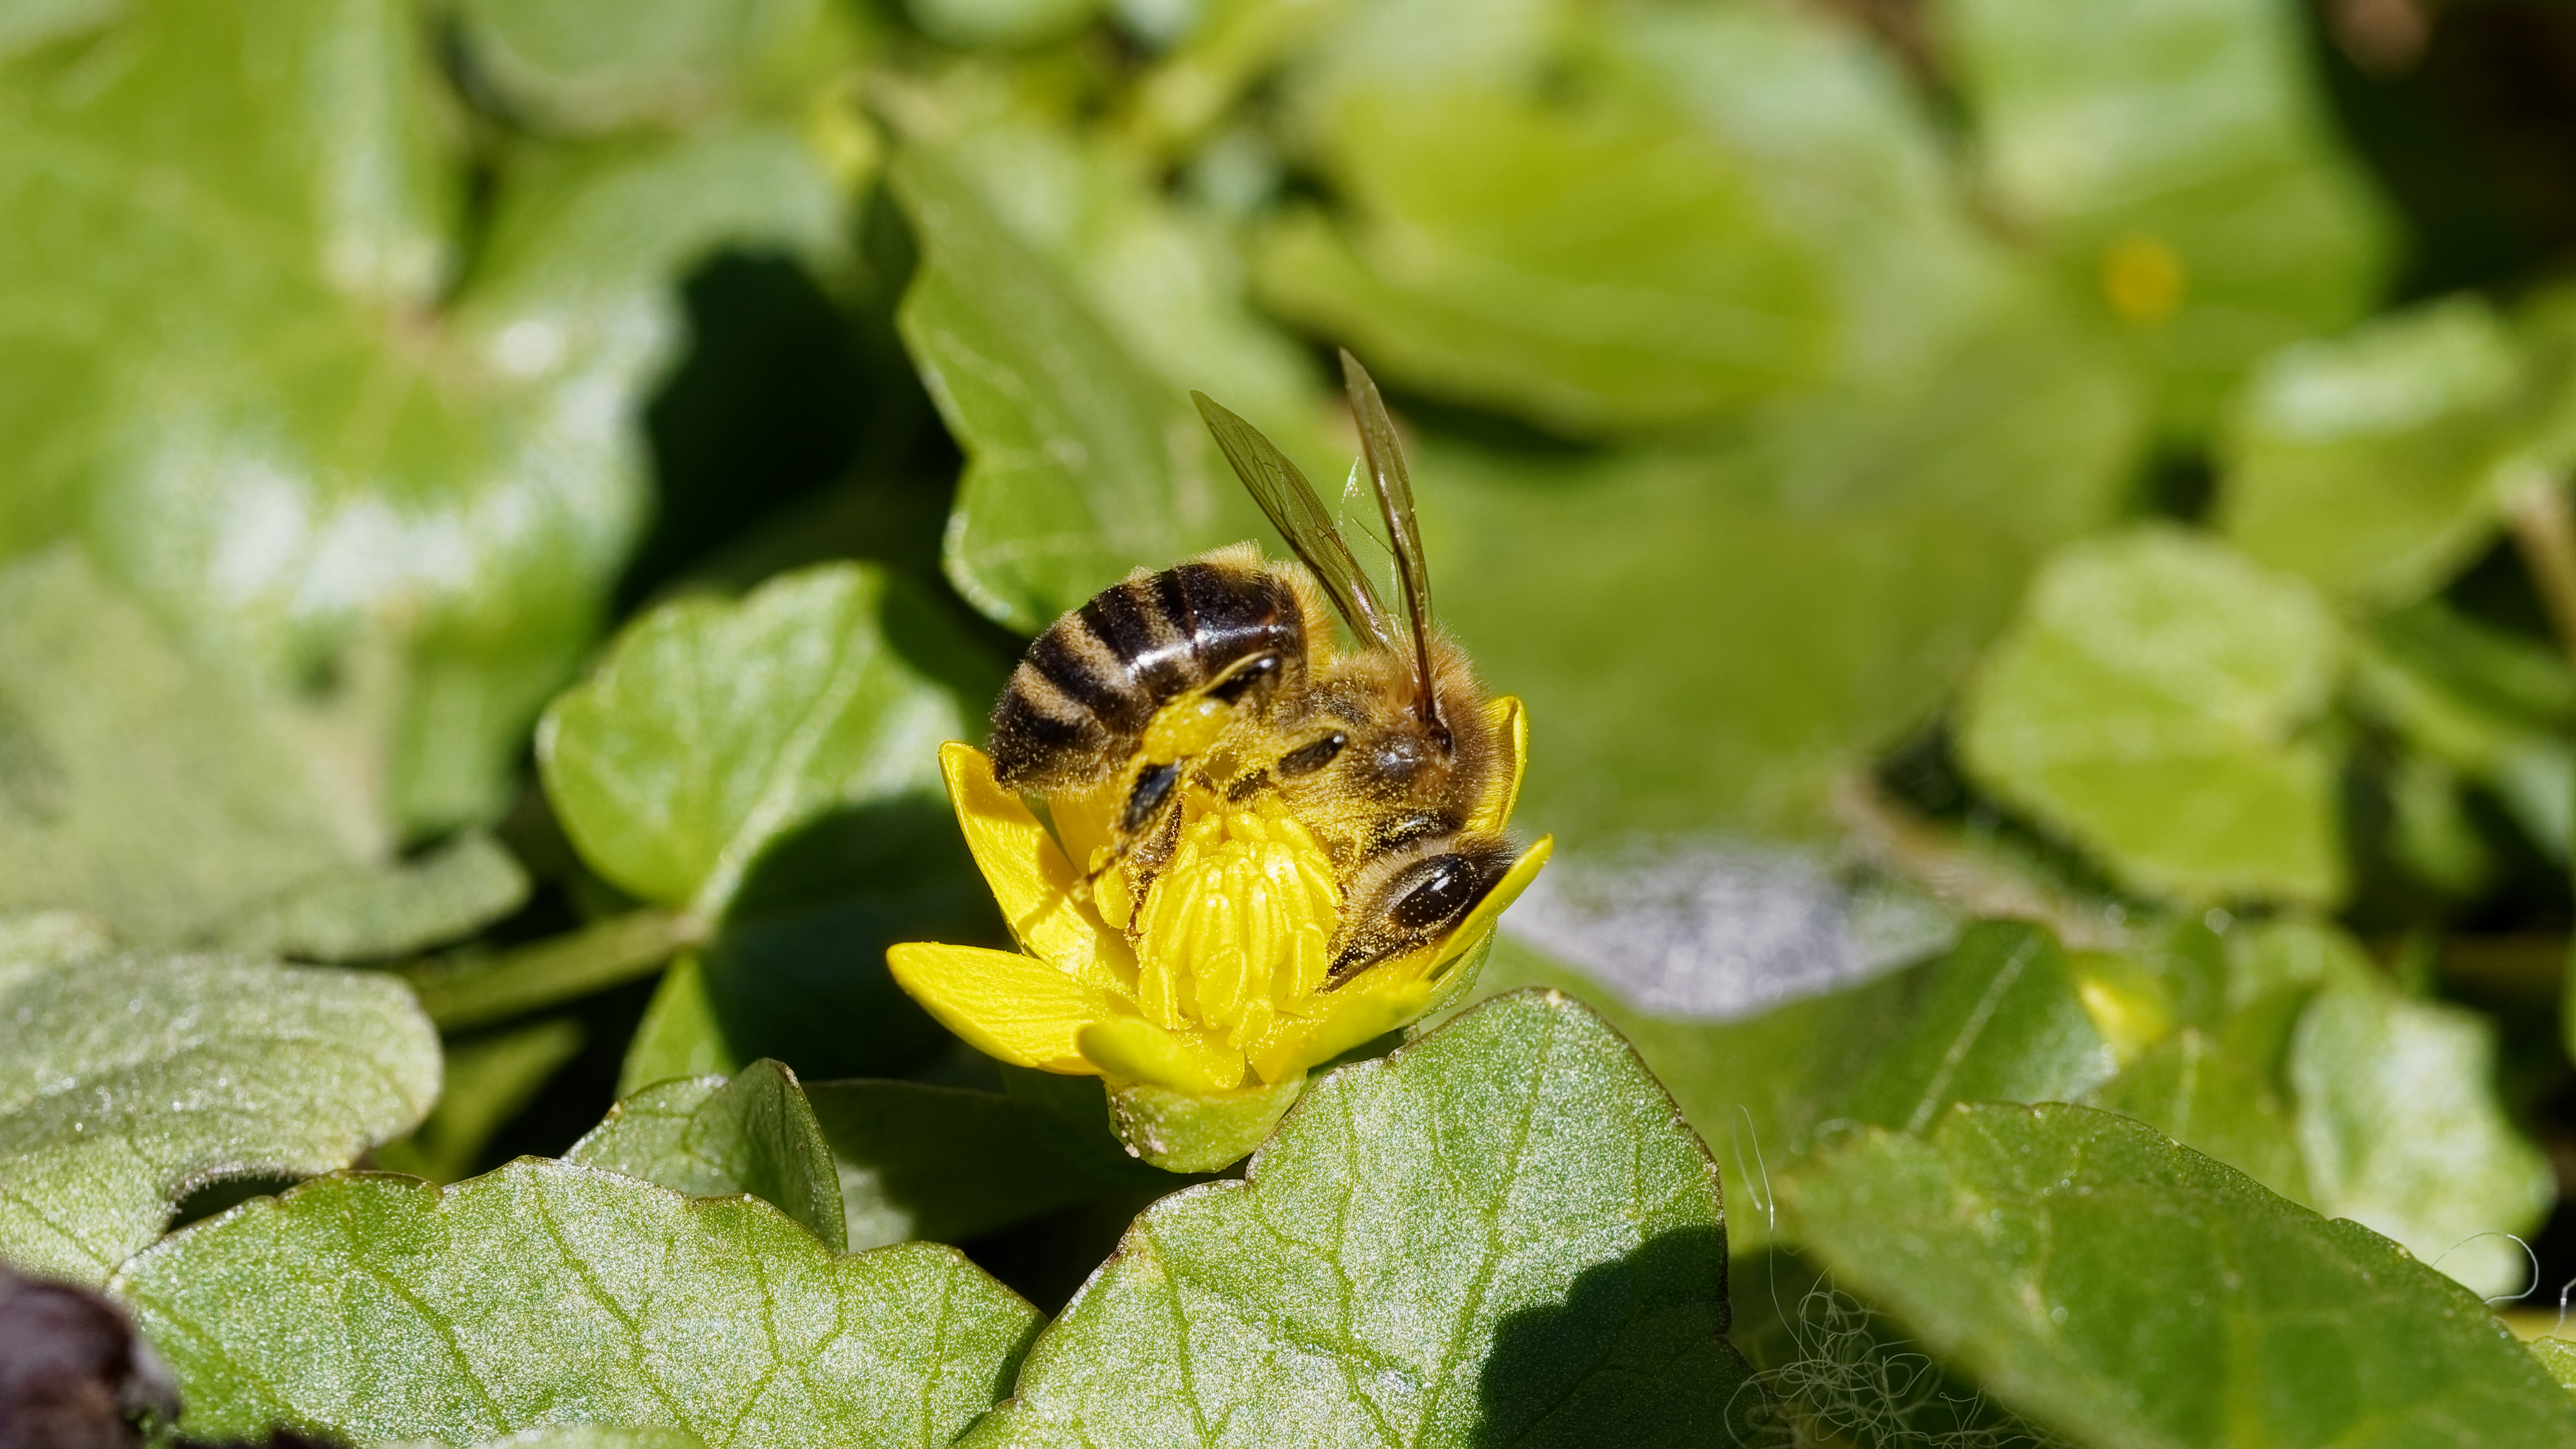 Bees Insect Yellow Leaves Flowers Yellow Flower Nature 4617x2597